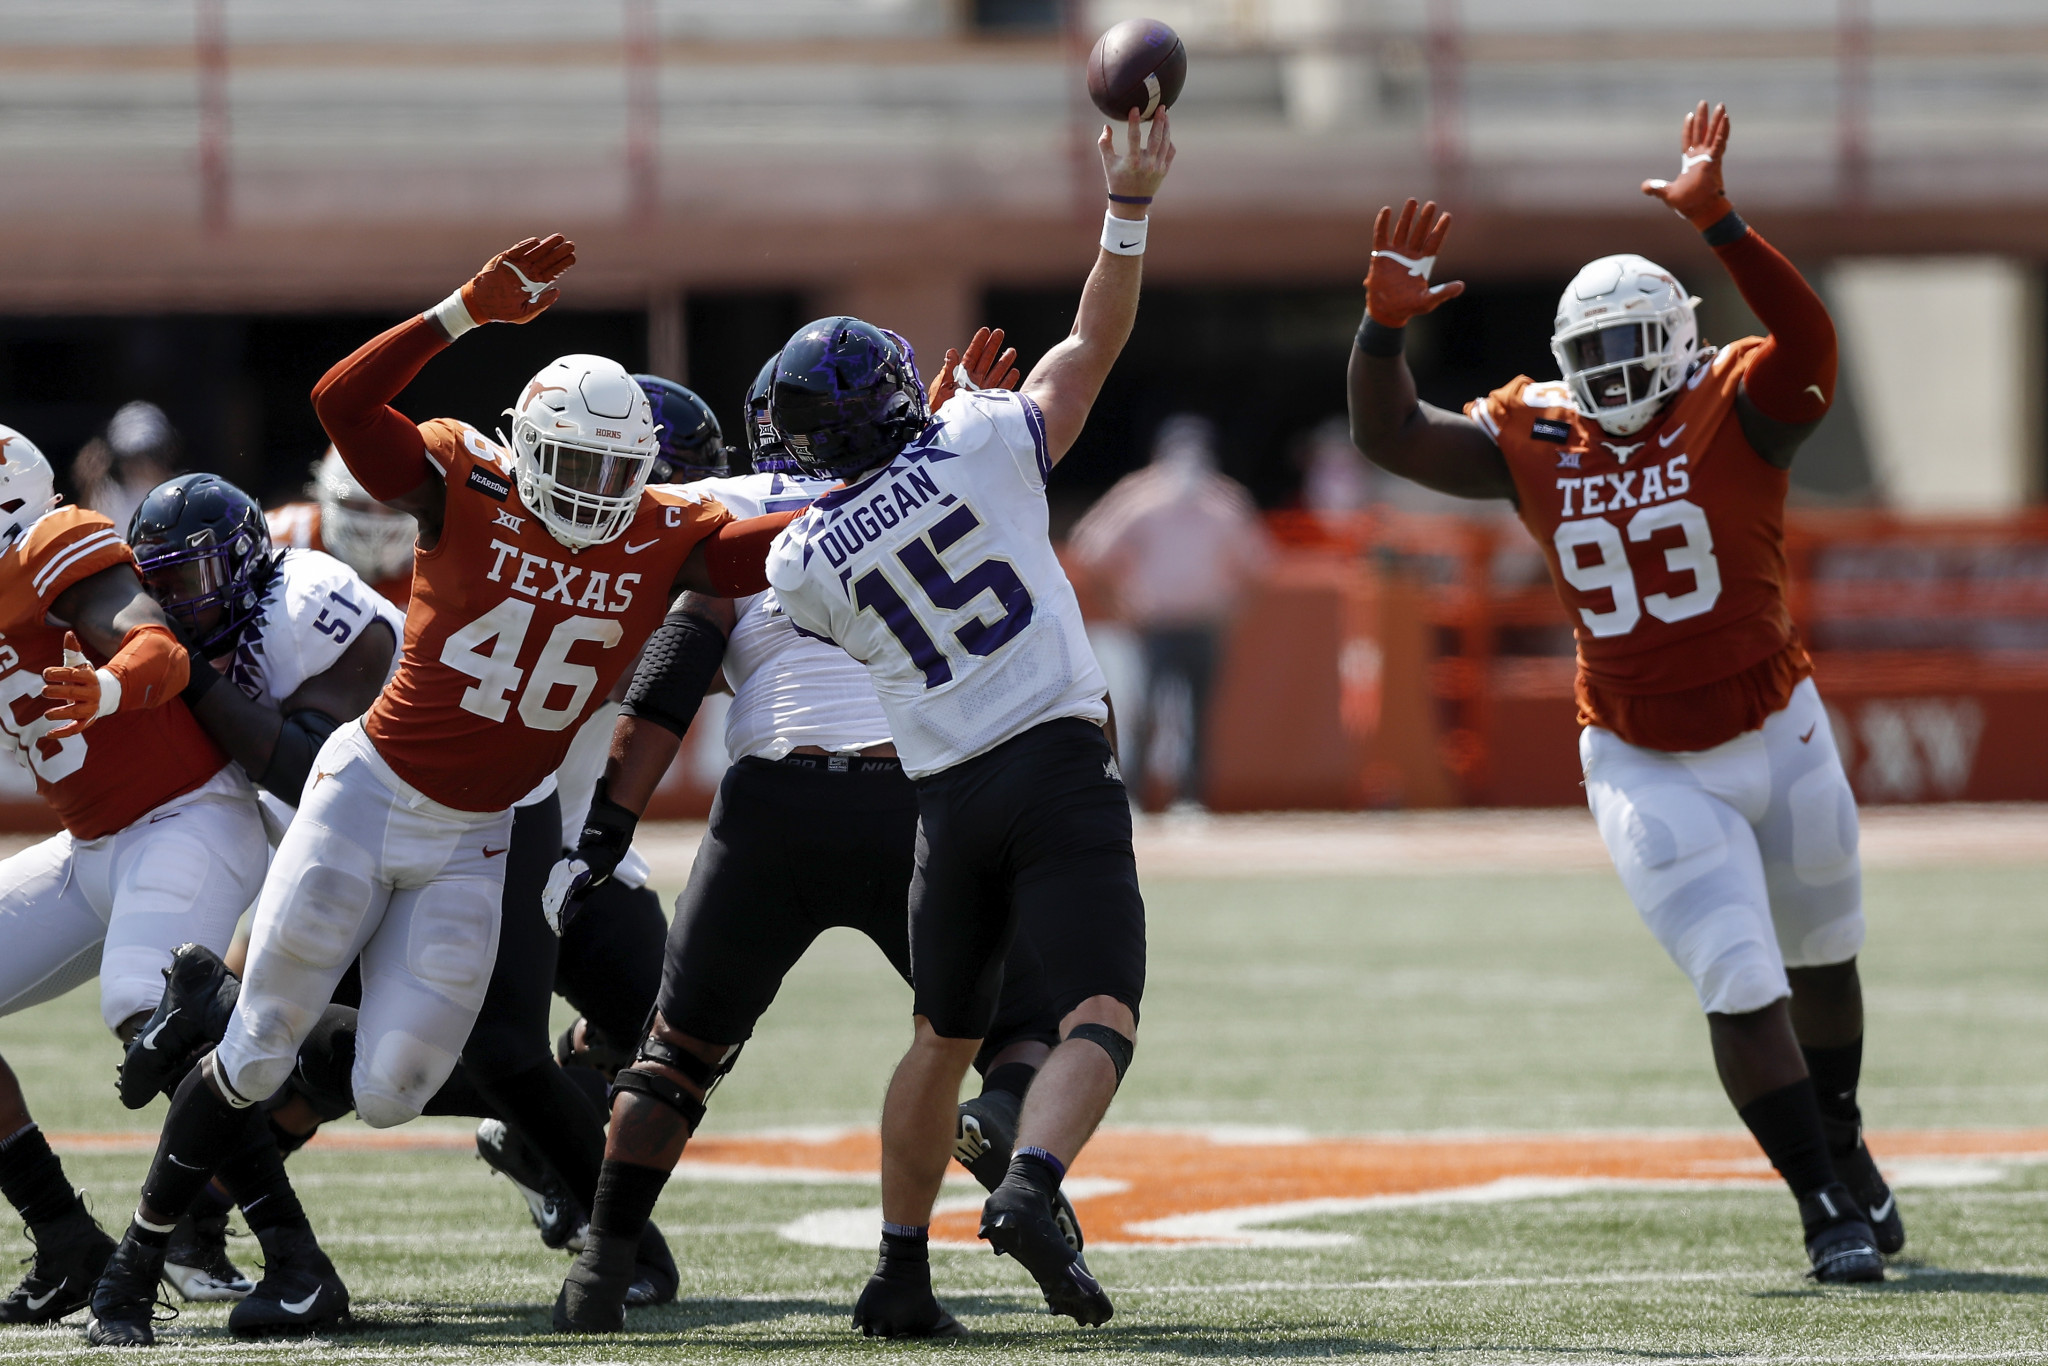 Texas was one of the states to have passed legislation allowing student-athletes to sign NIL deals ©Getty Images